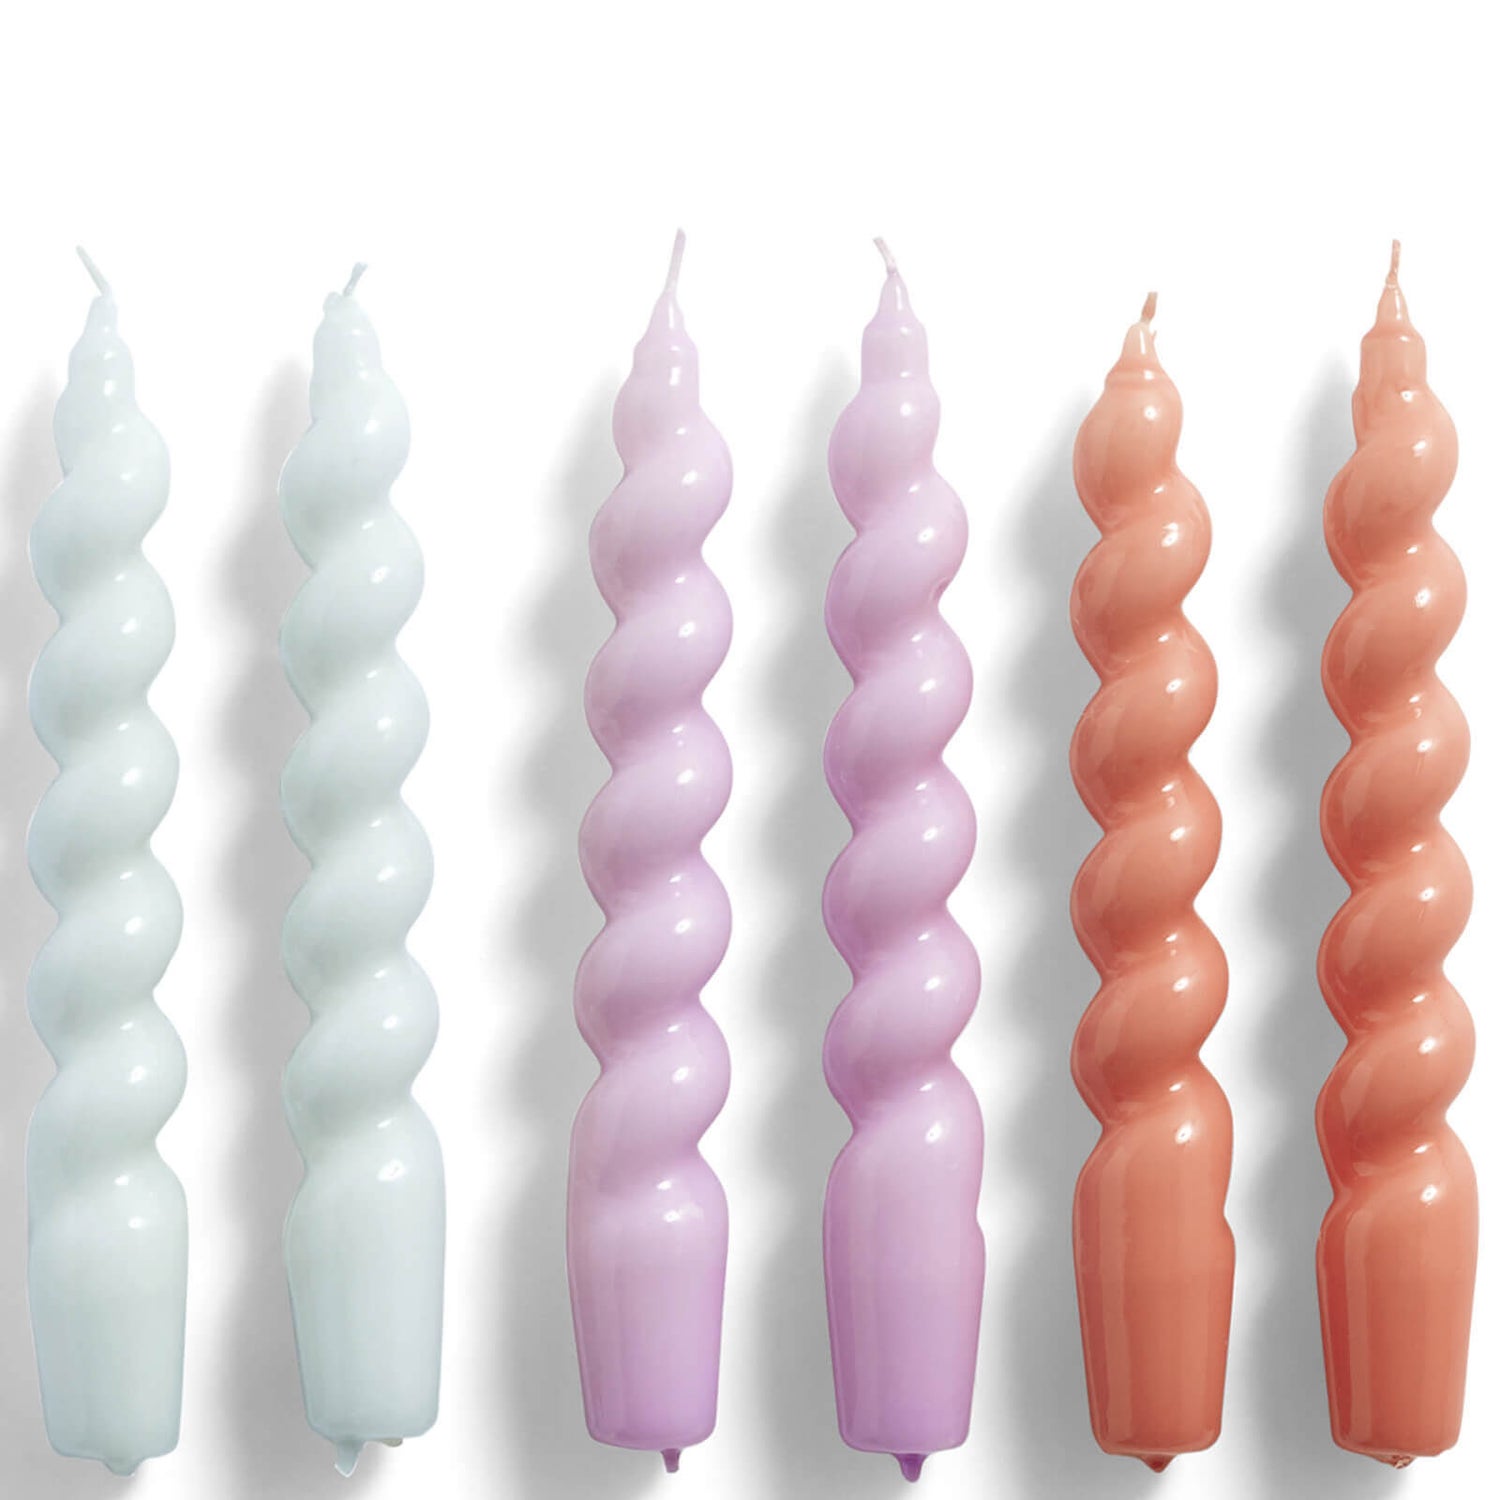 HAY Candle Spiral Set of 6 - Blue/Lilac/Apricot